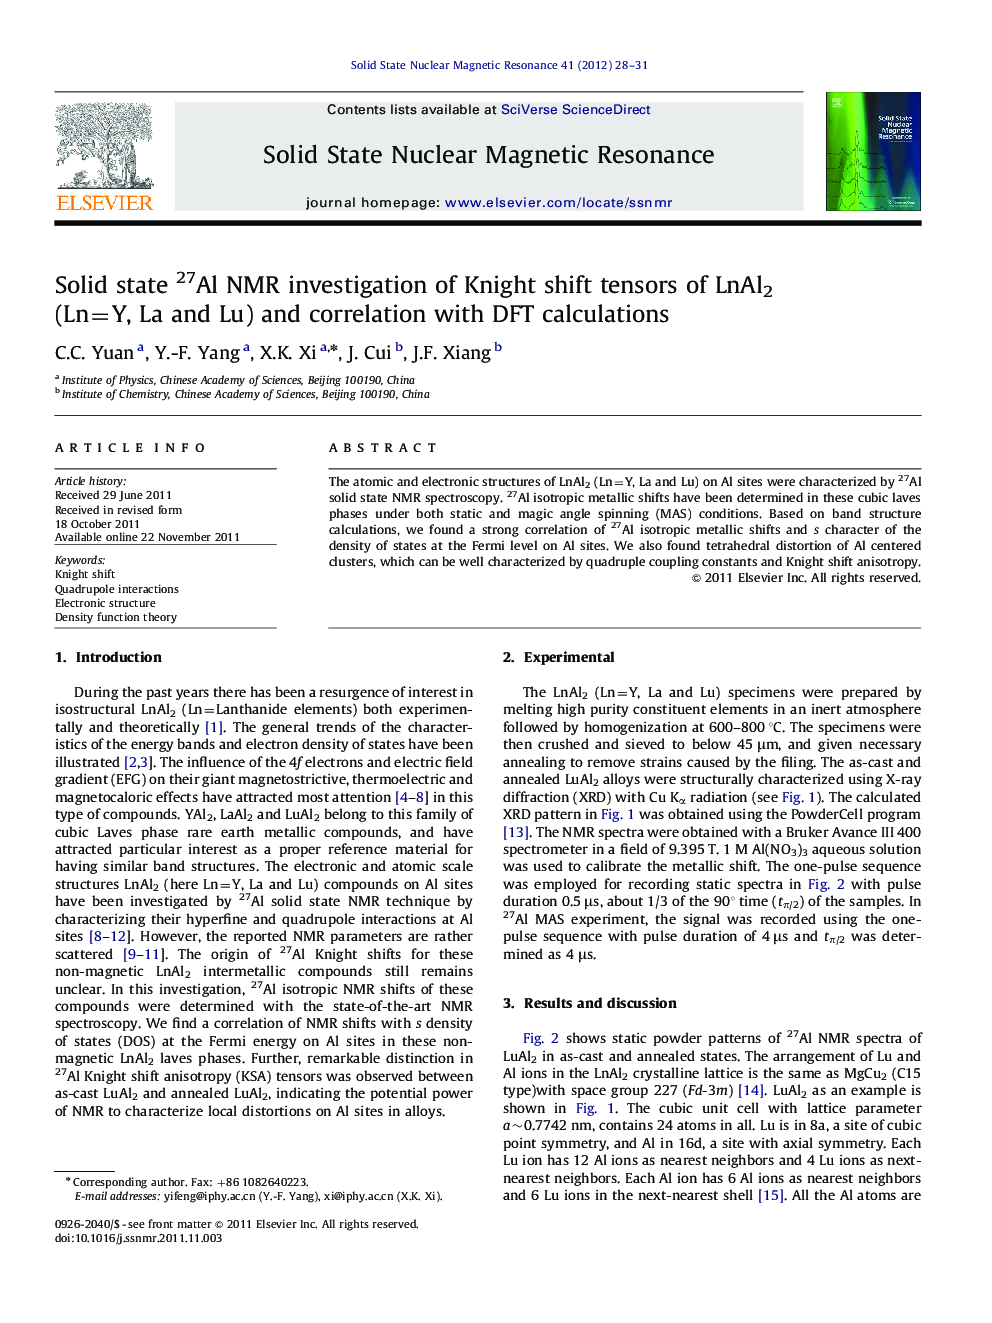 Solid state 27Al NMR investigation of Knight shift tensors of LnAl2 (Ln=Y, La and Lu) and correlation with DFT calculations